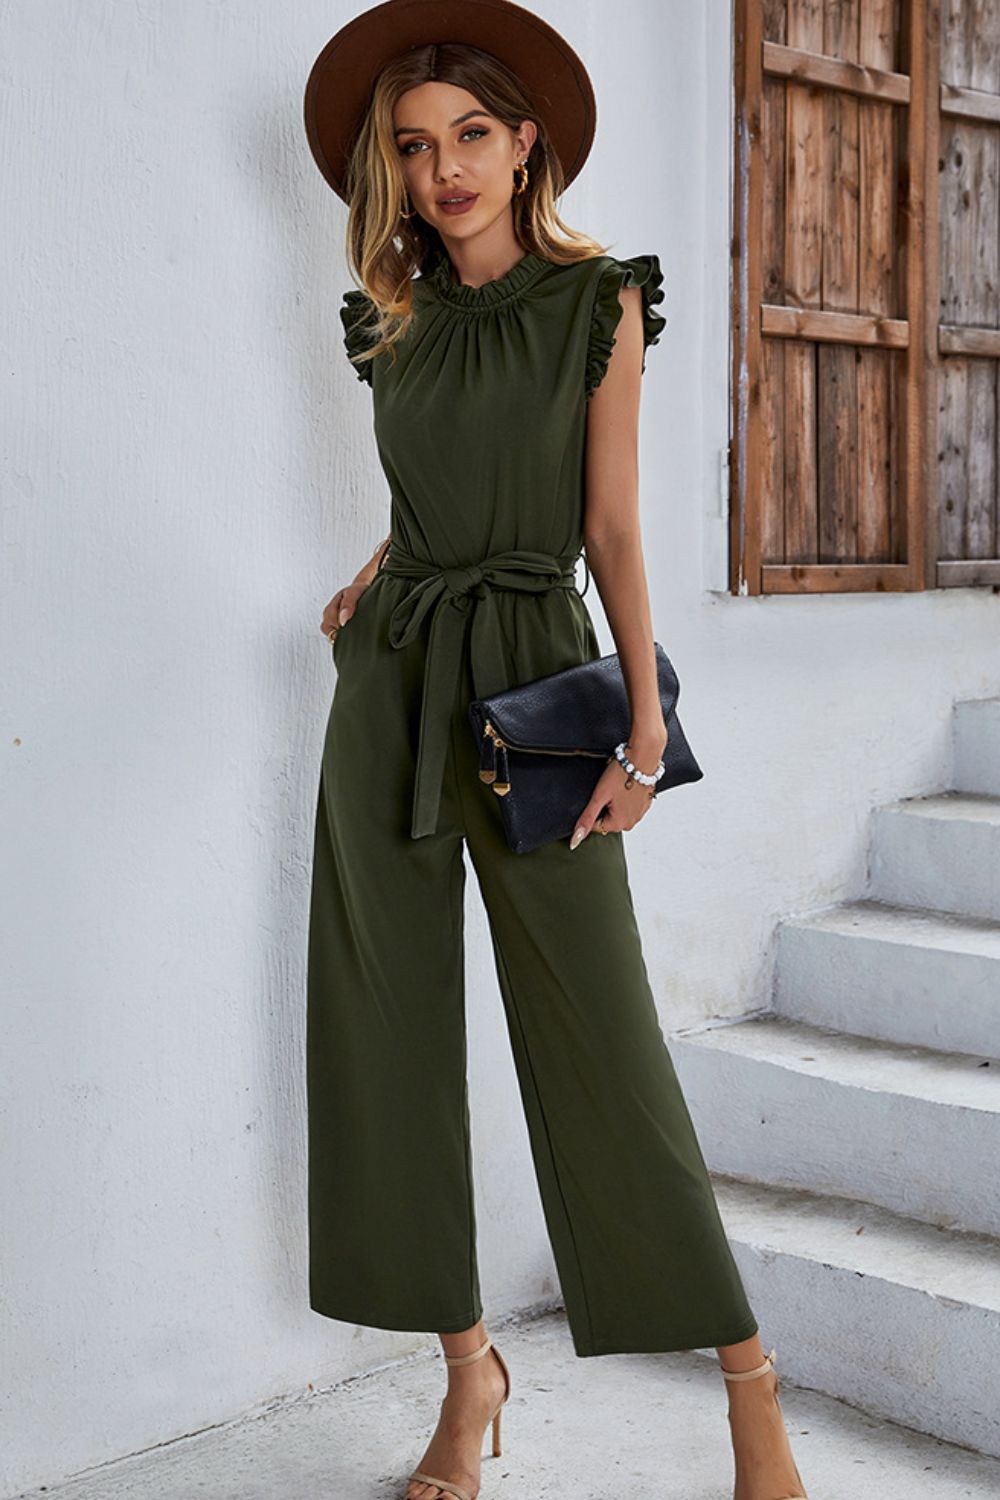 Butterfly Sleeve Tie Waist Jumpsuit The Stout Steer